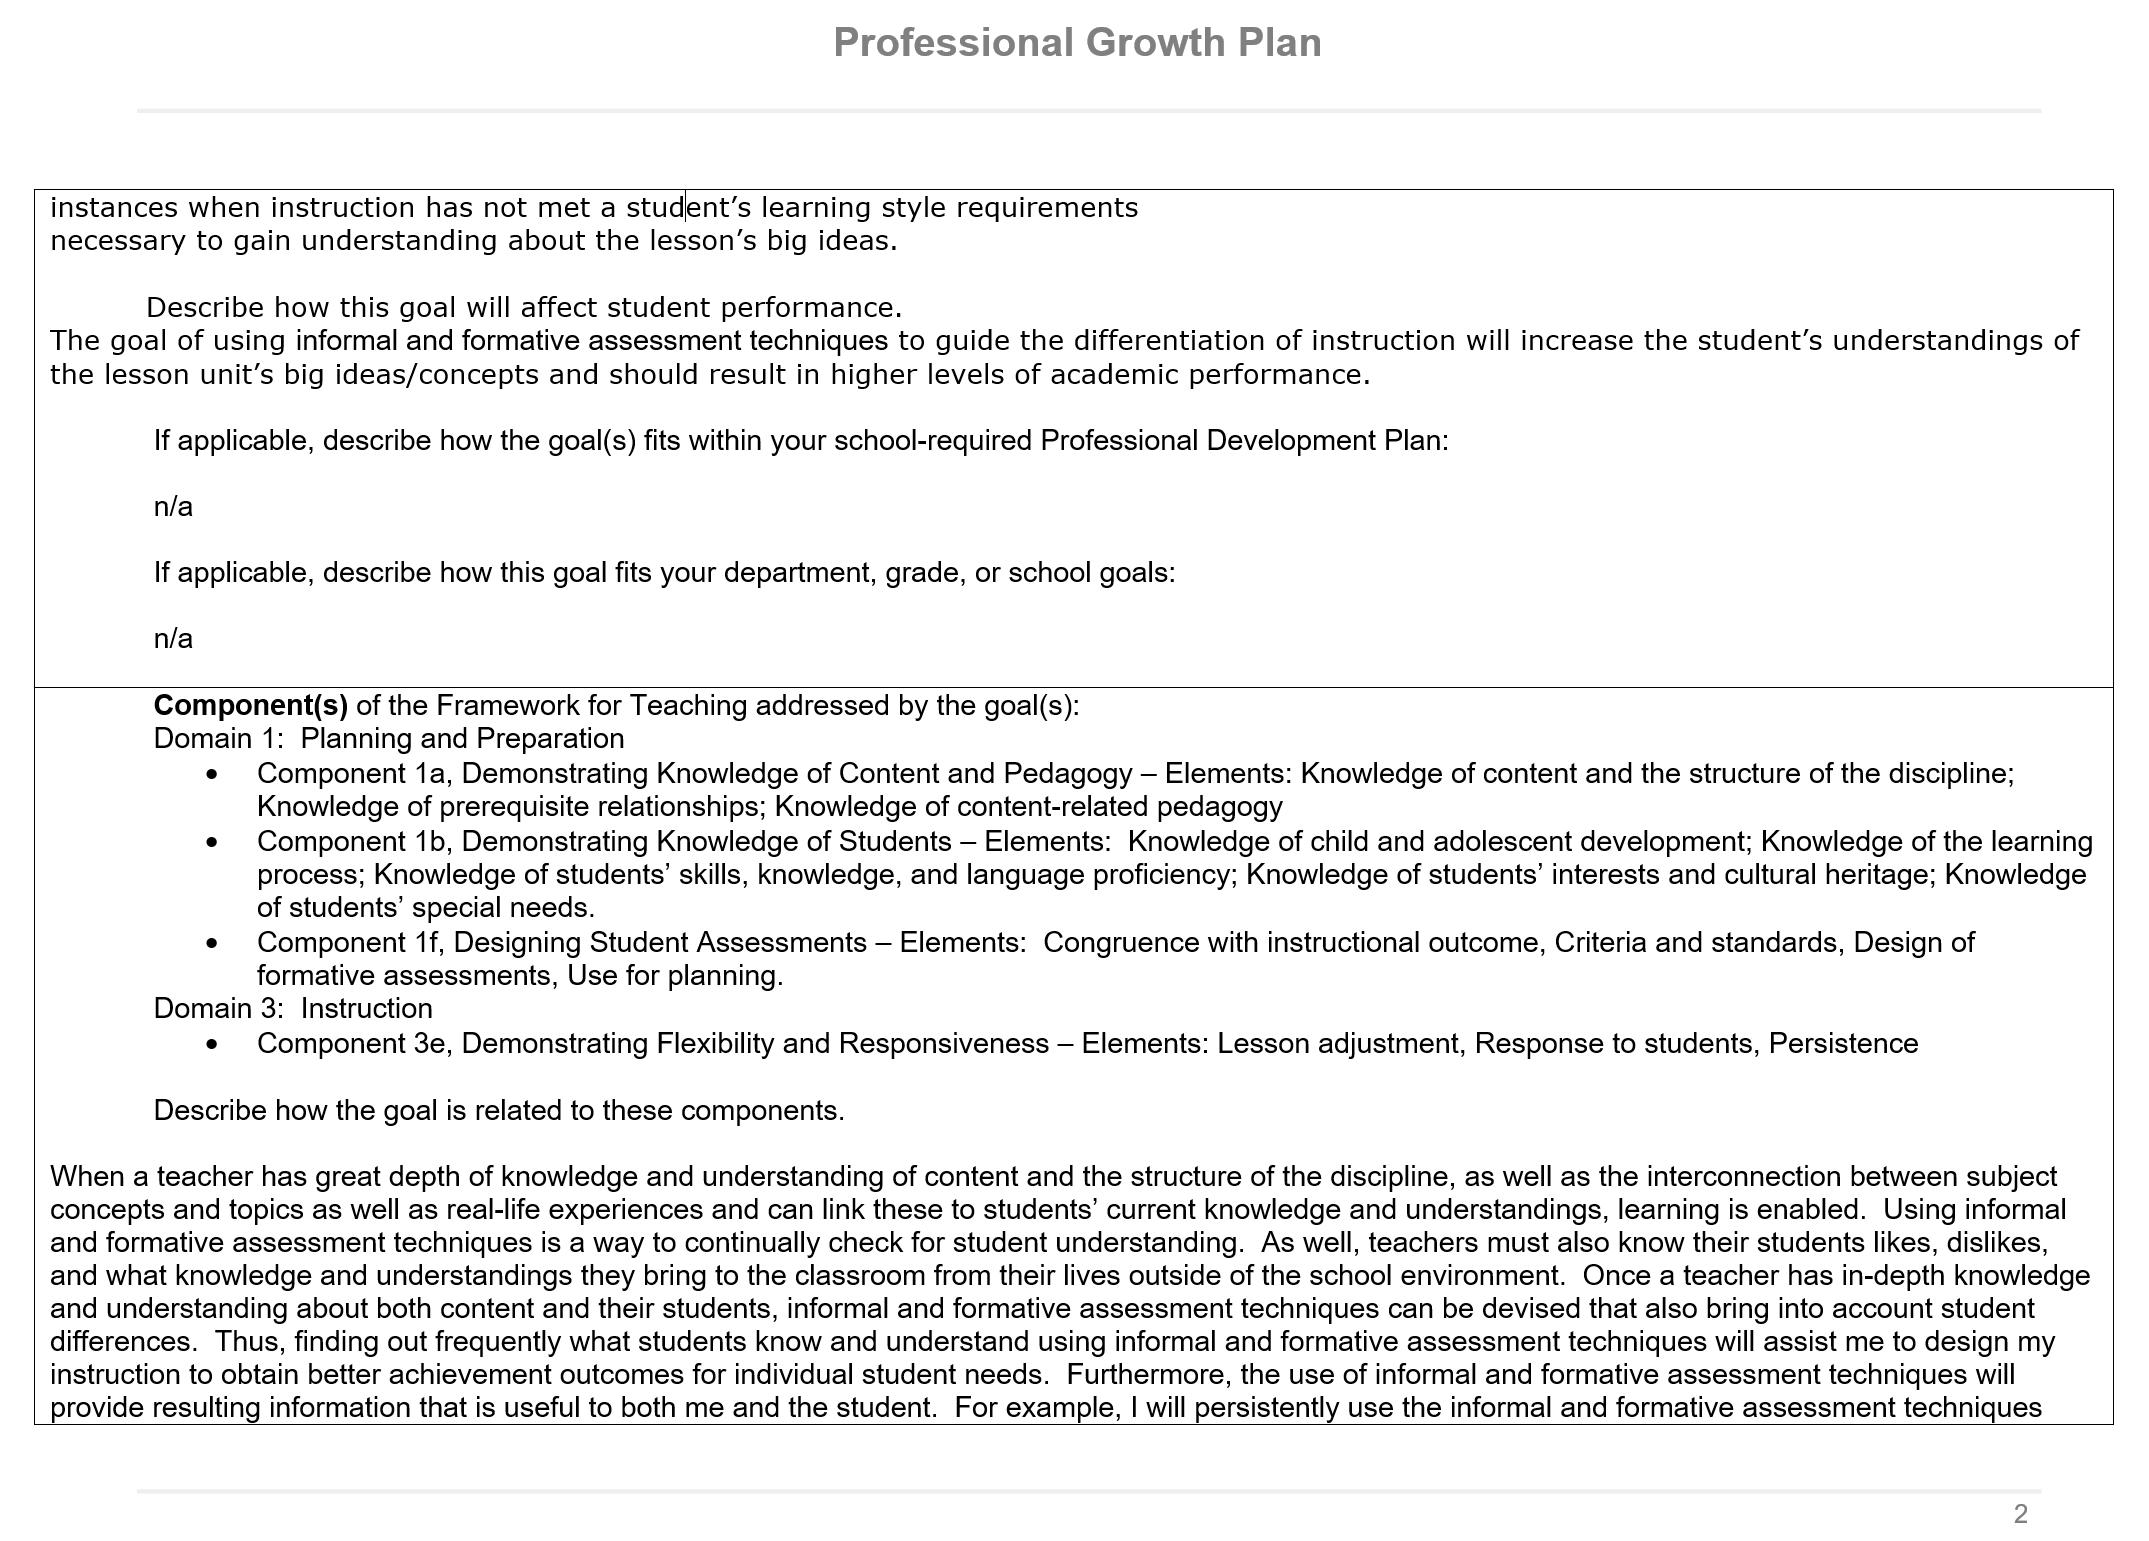 professional growth plan p 2 of 7